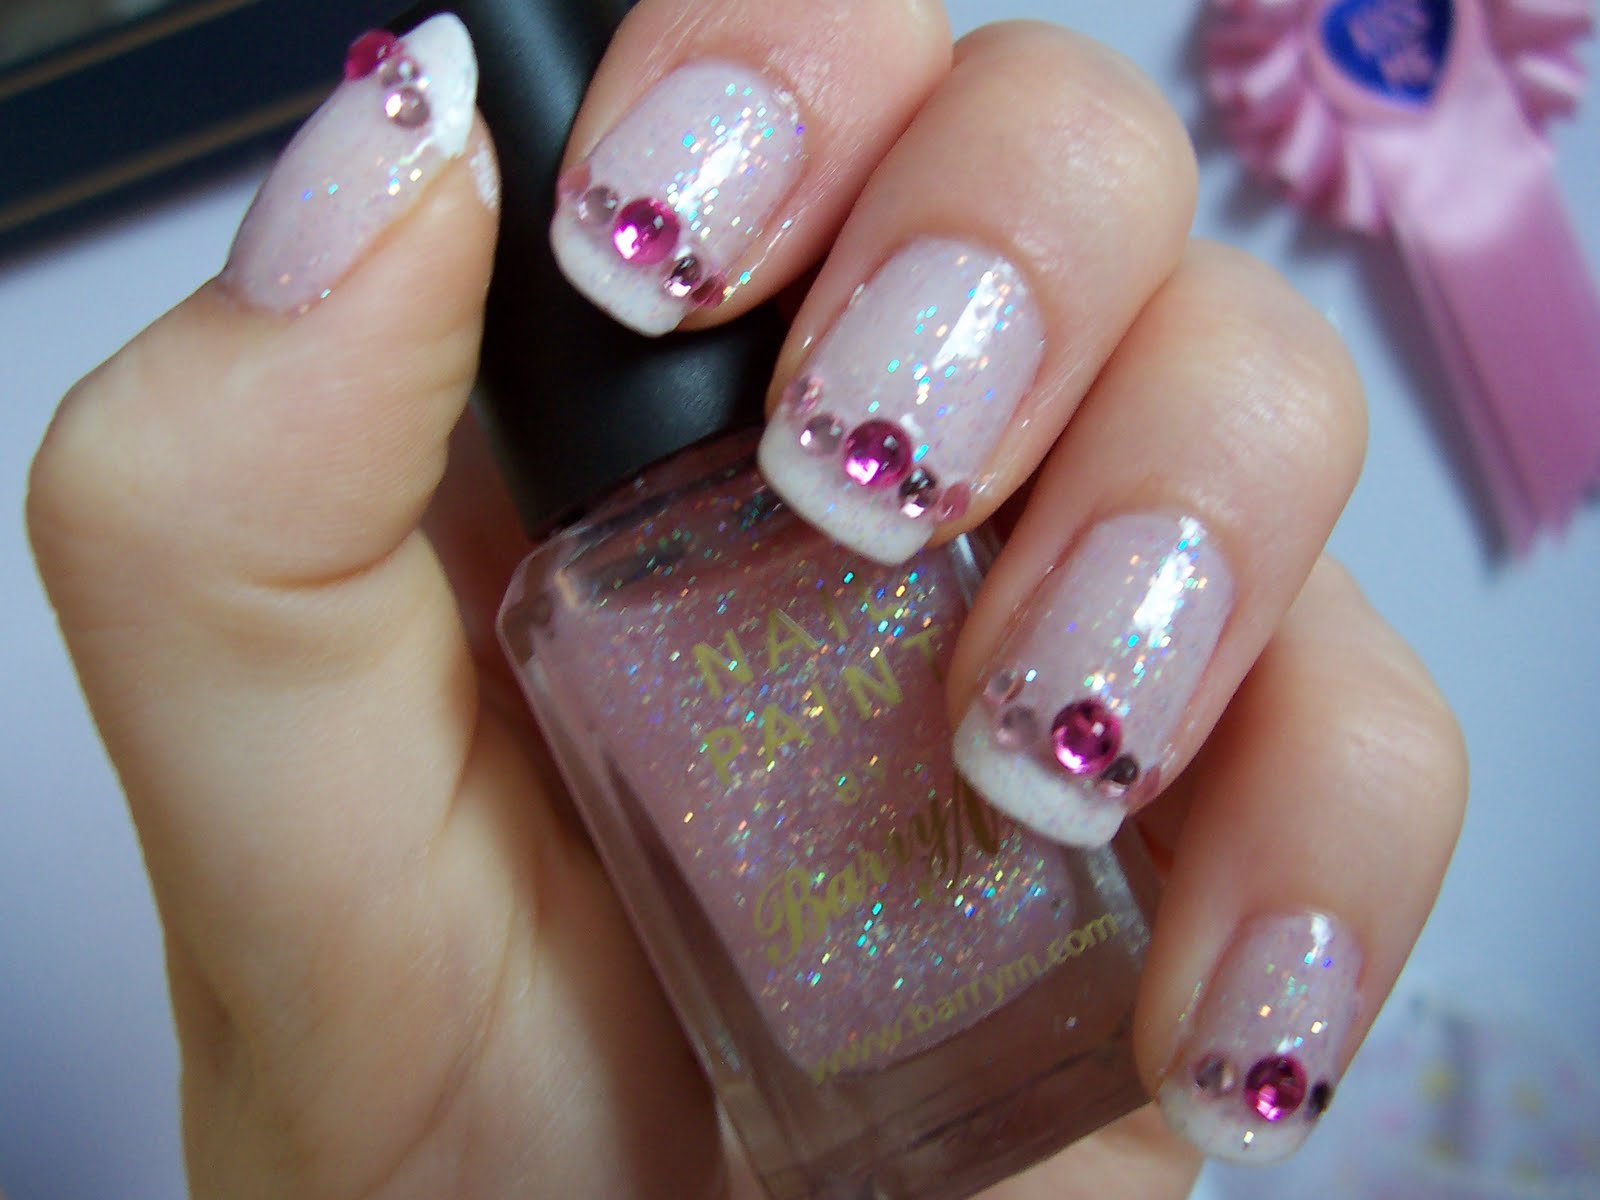 8. Bejeweled Nail Design - wide 5